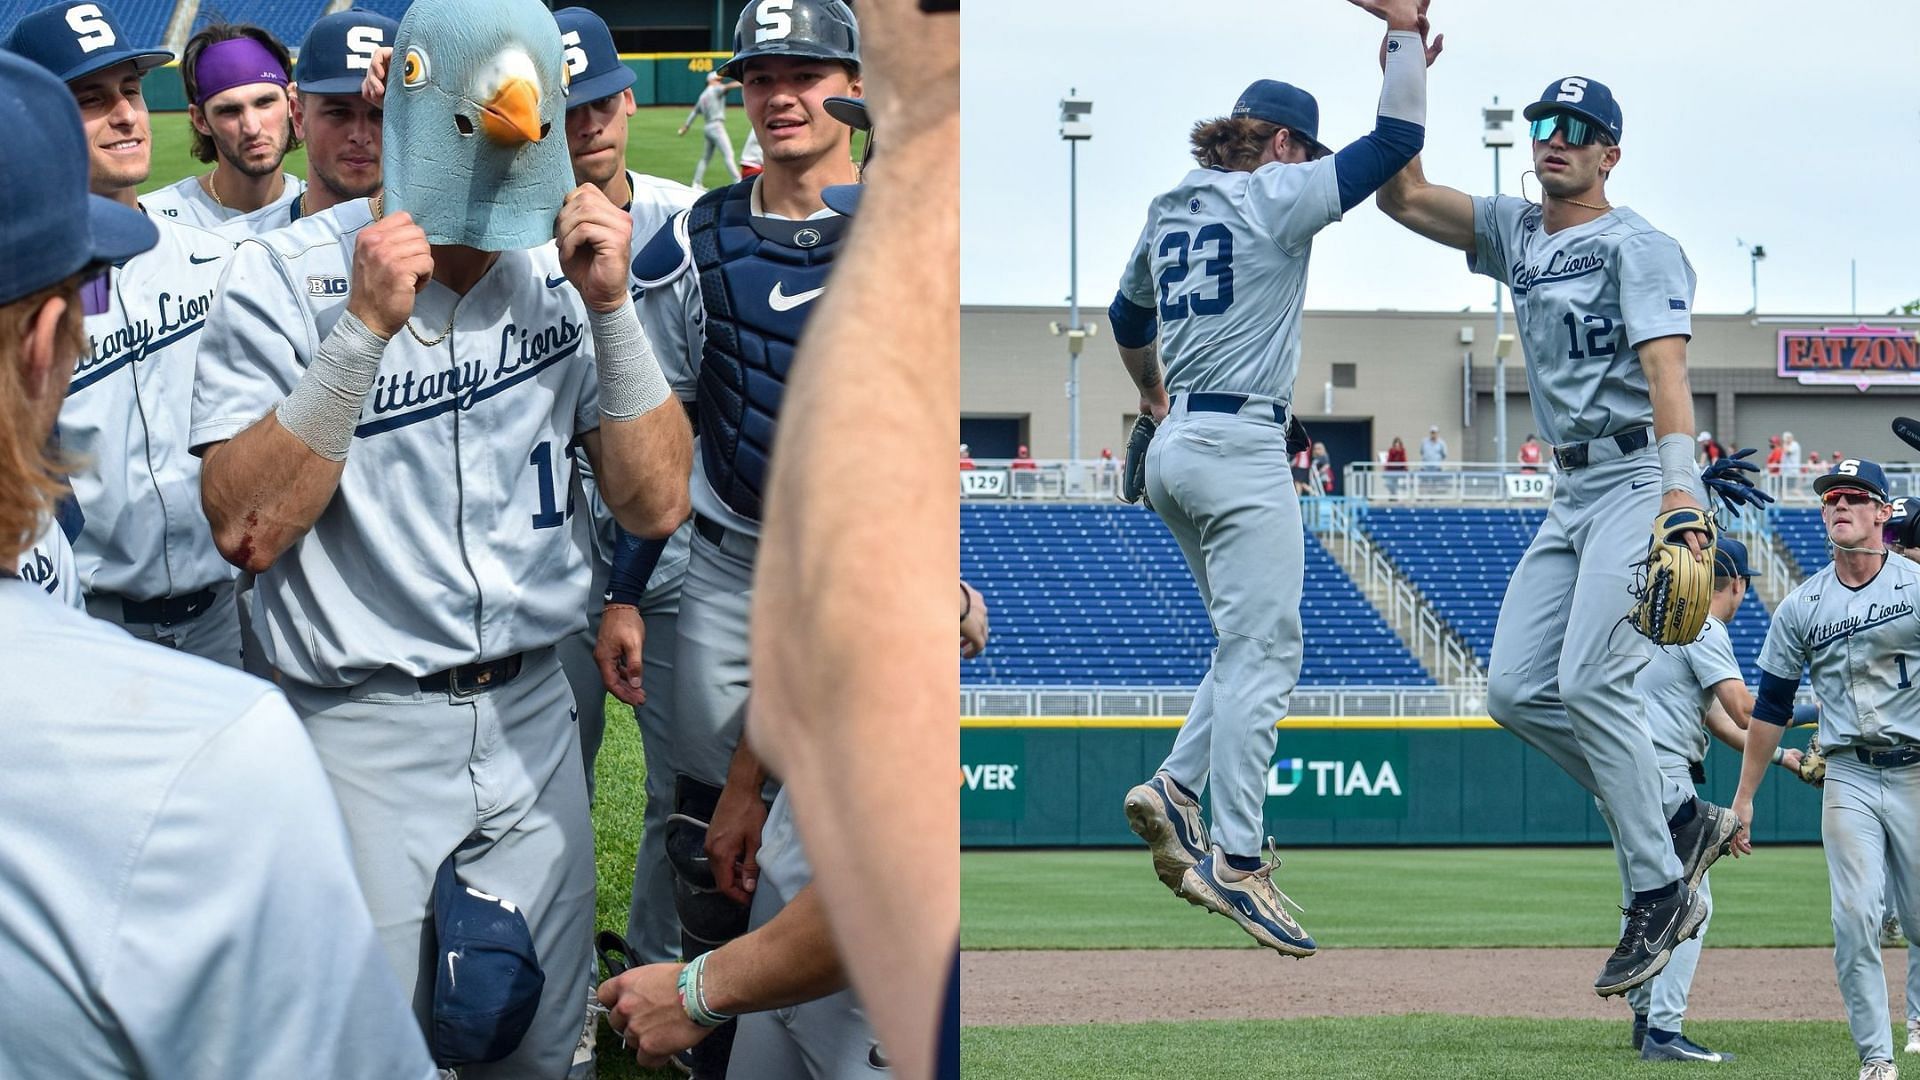 Could the Nittany Lions qualify to the NCAA Baseball Tournament for the first time in 24 years?